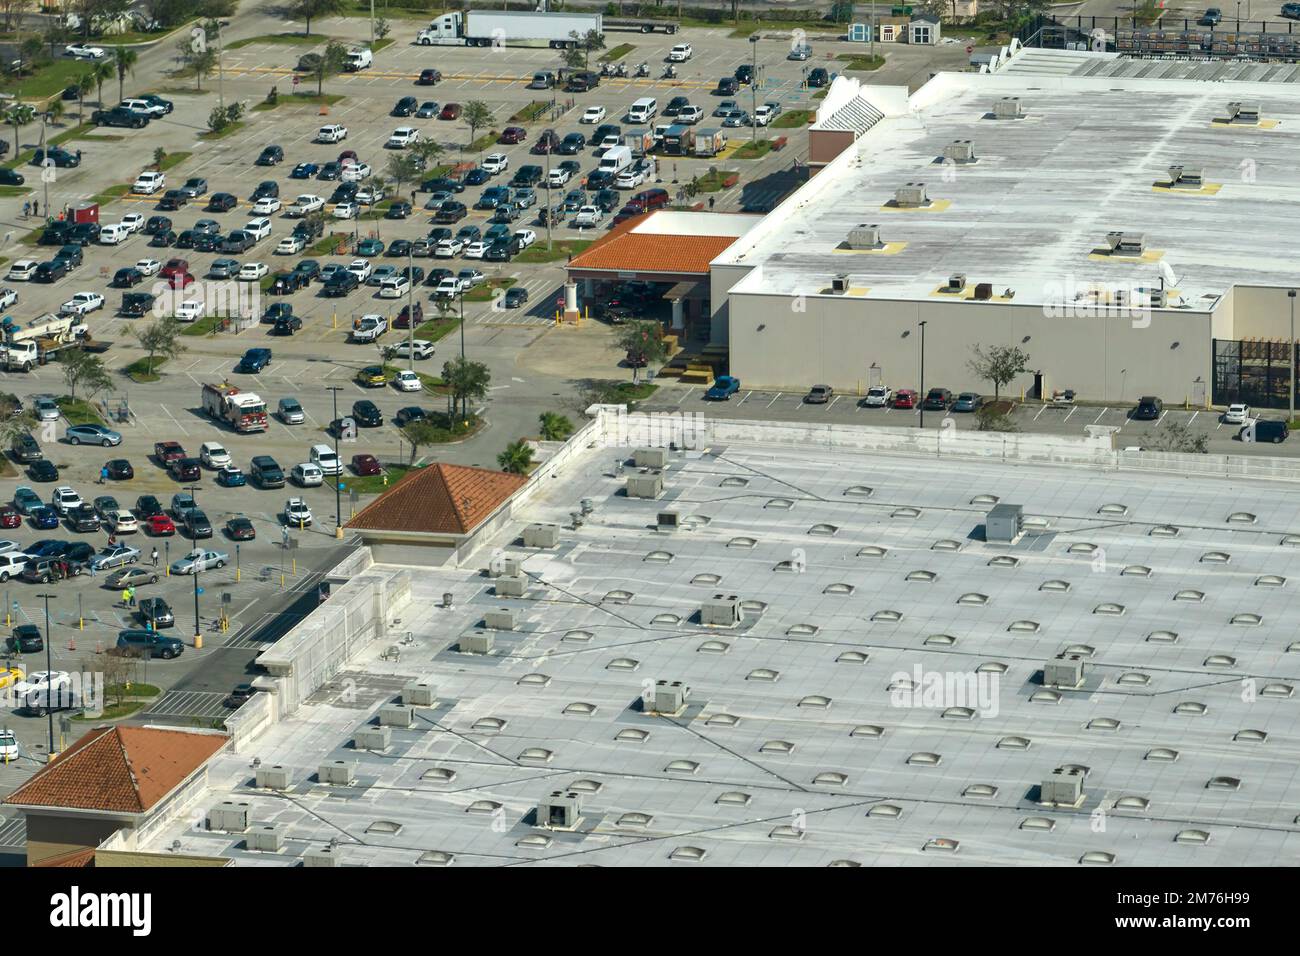 View from above of american grocery store with many parked cars on parking lot with lines and markings for parking places and directions. Place for Stock Photo